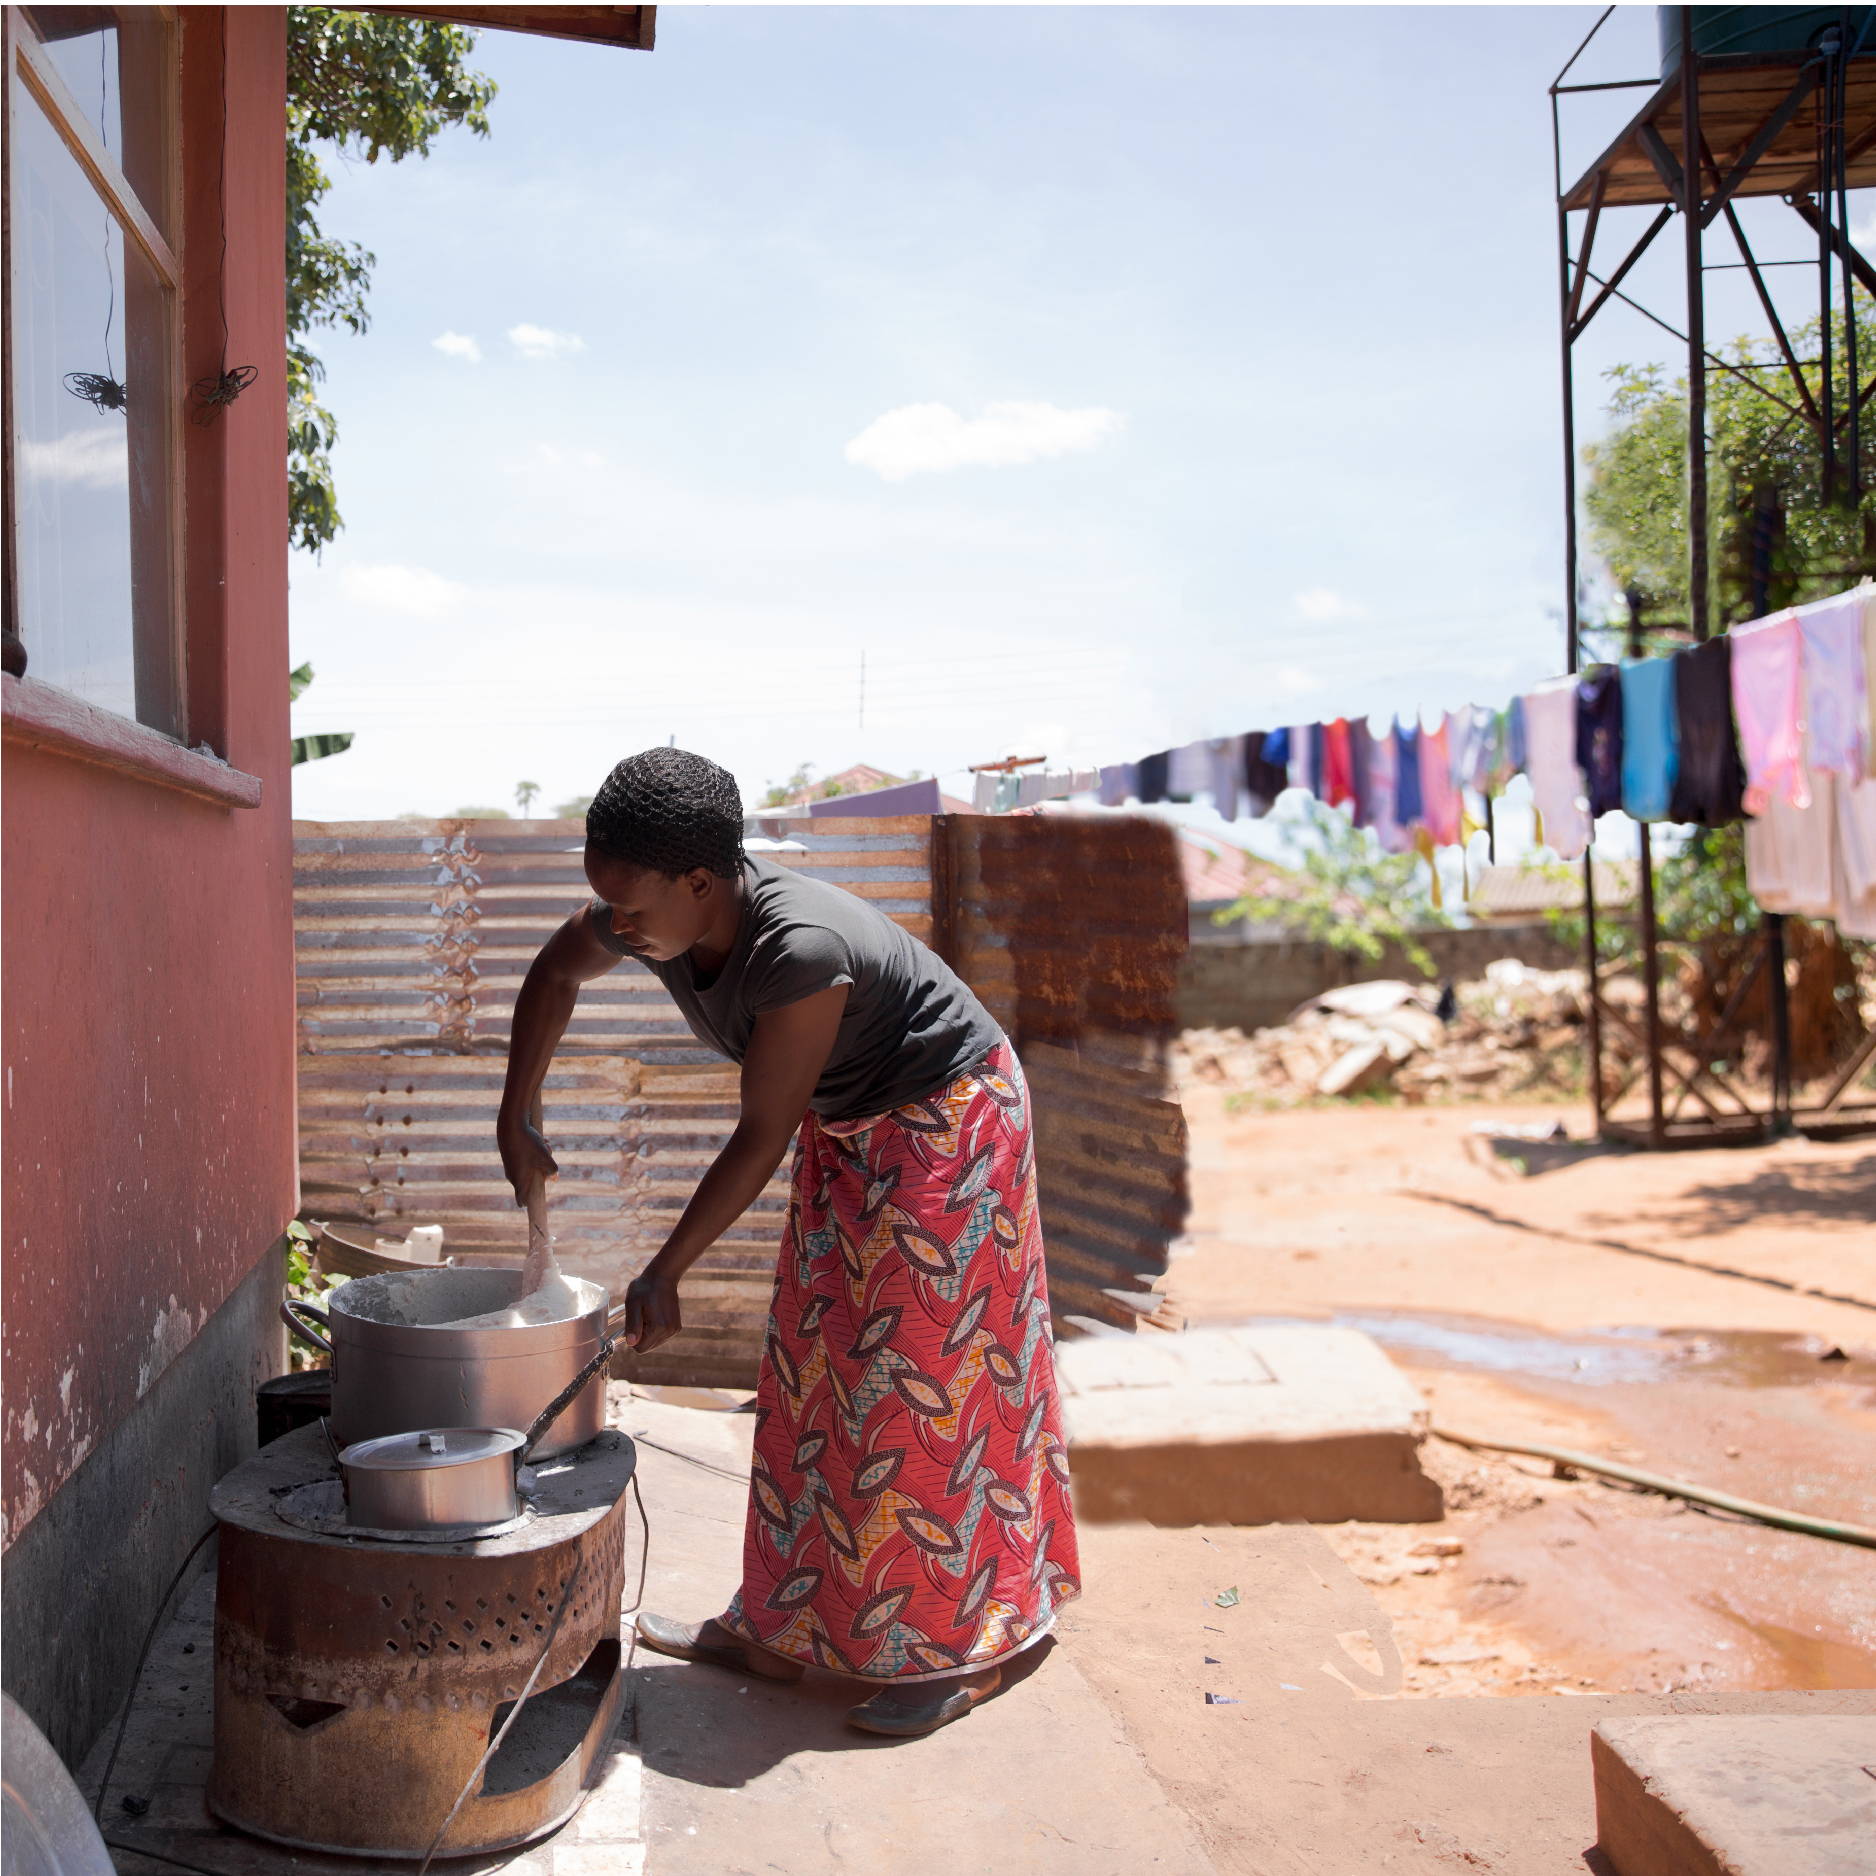 A Zambian woman stands outside cooking and stirring a large pot of nshima for small children.  